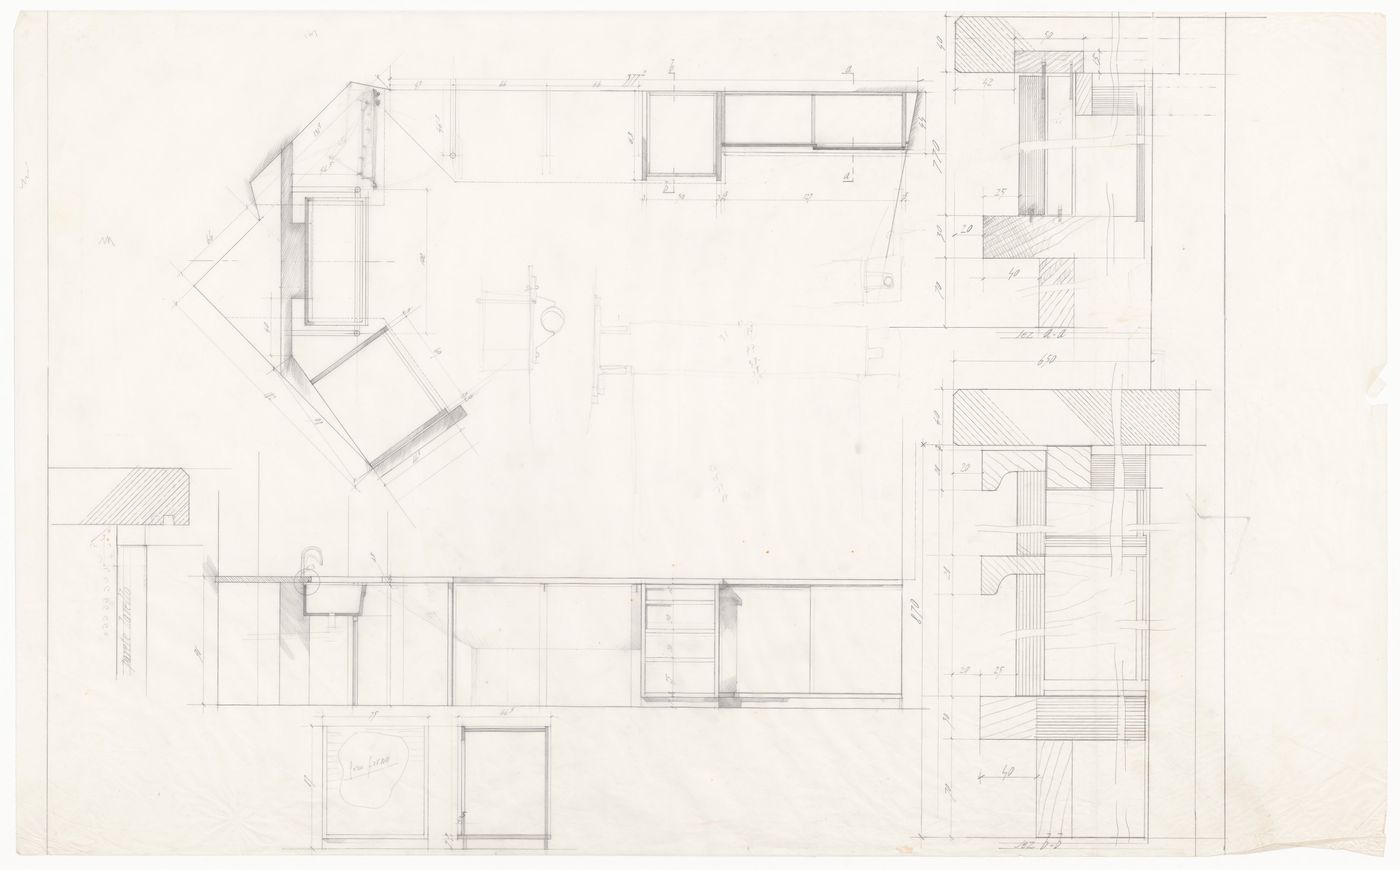 Plans and sections for Casa De Paolini, Milan, Italy